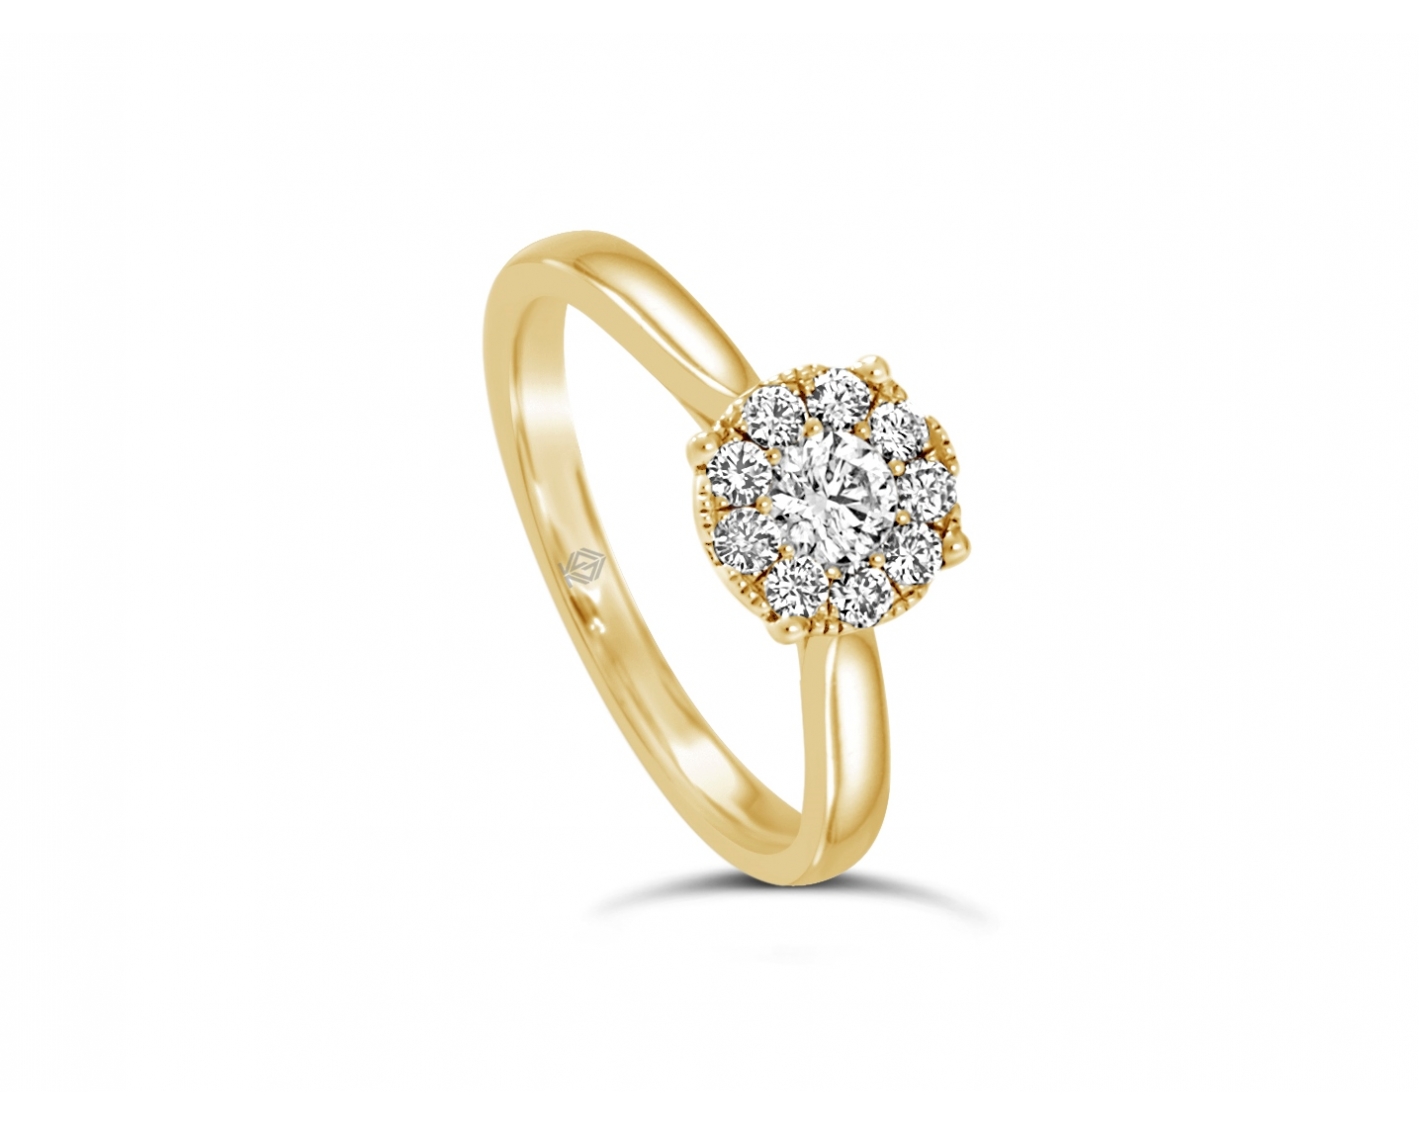 18k yellow gold cathedral illusion set engagement ring